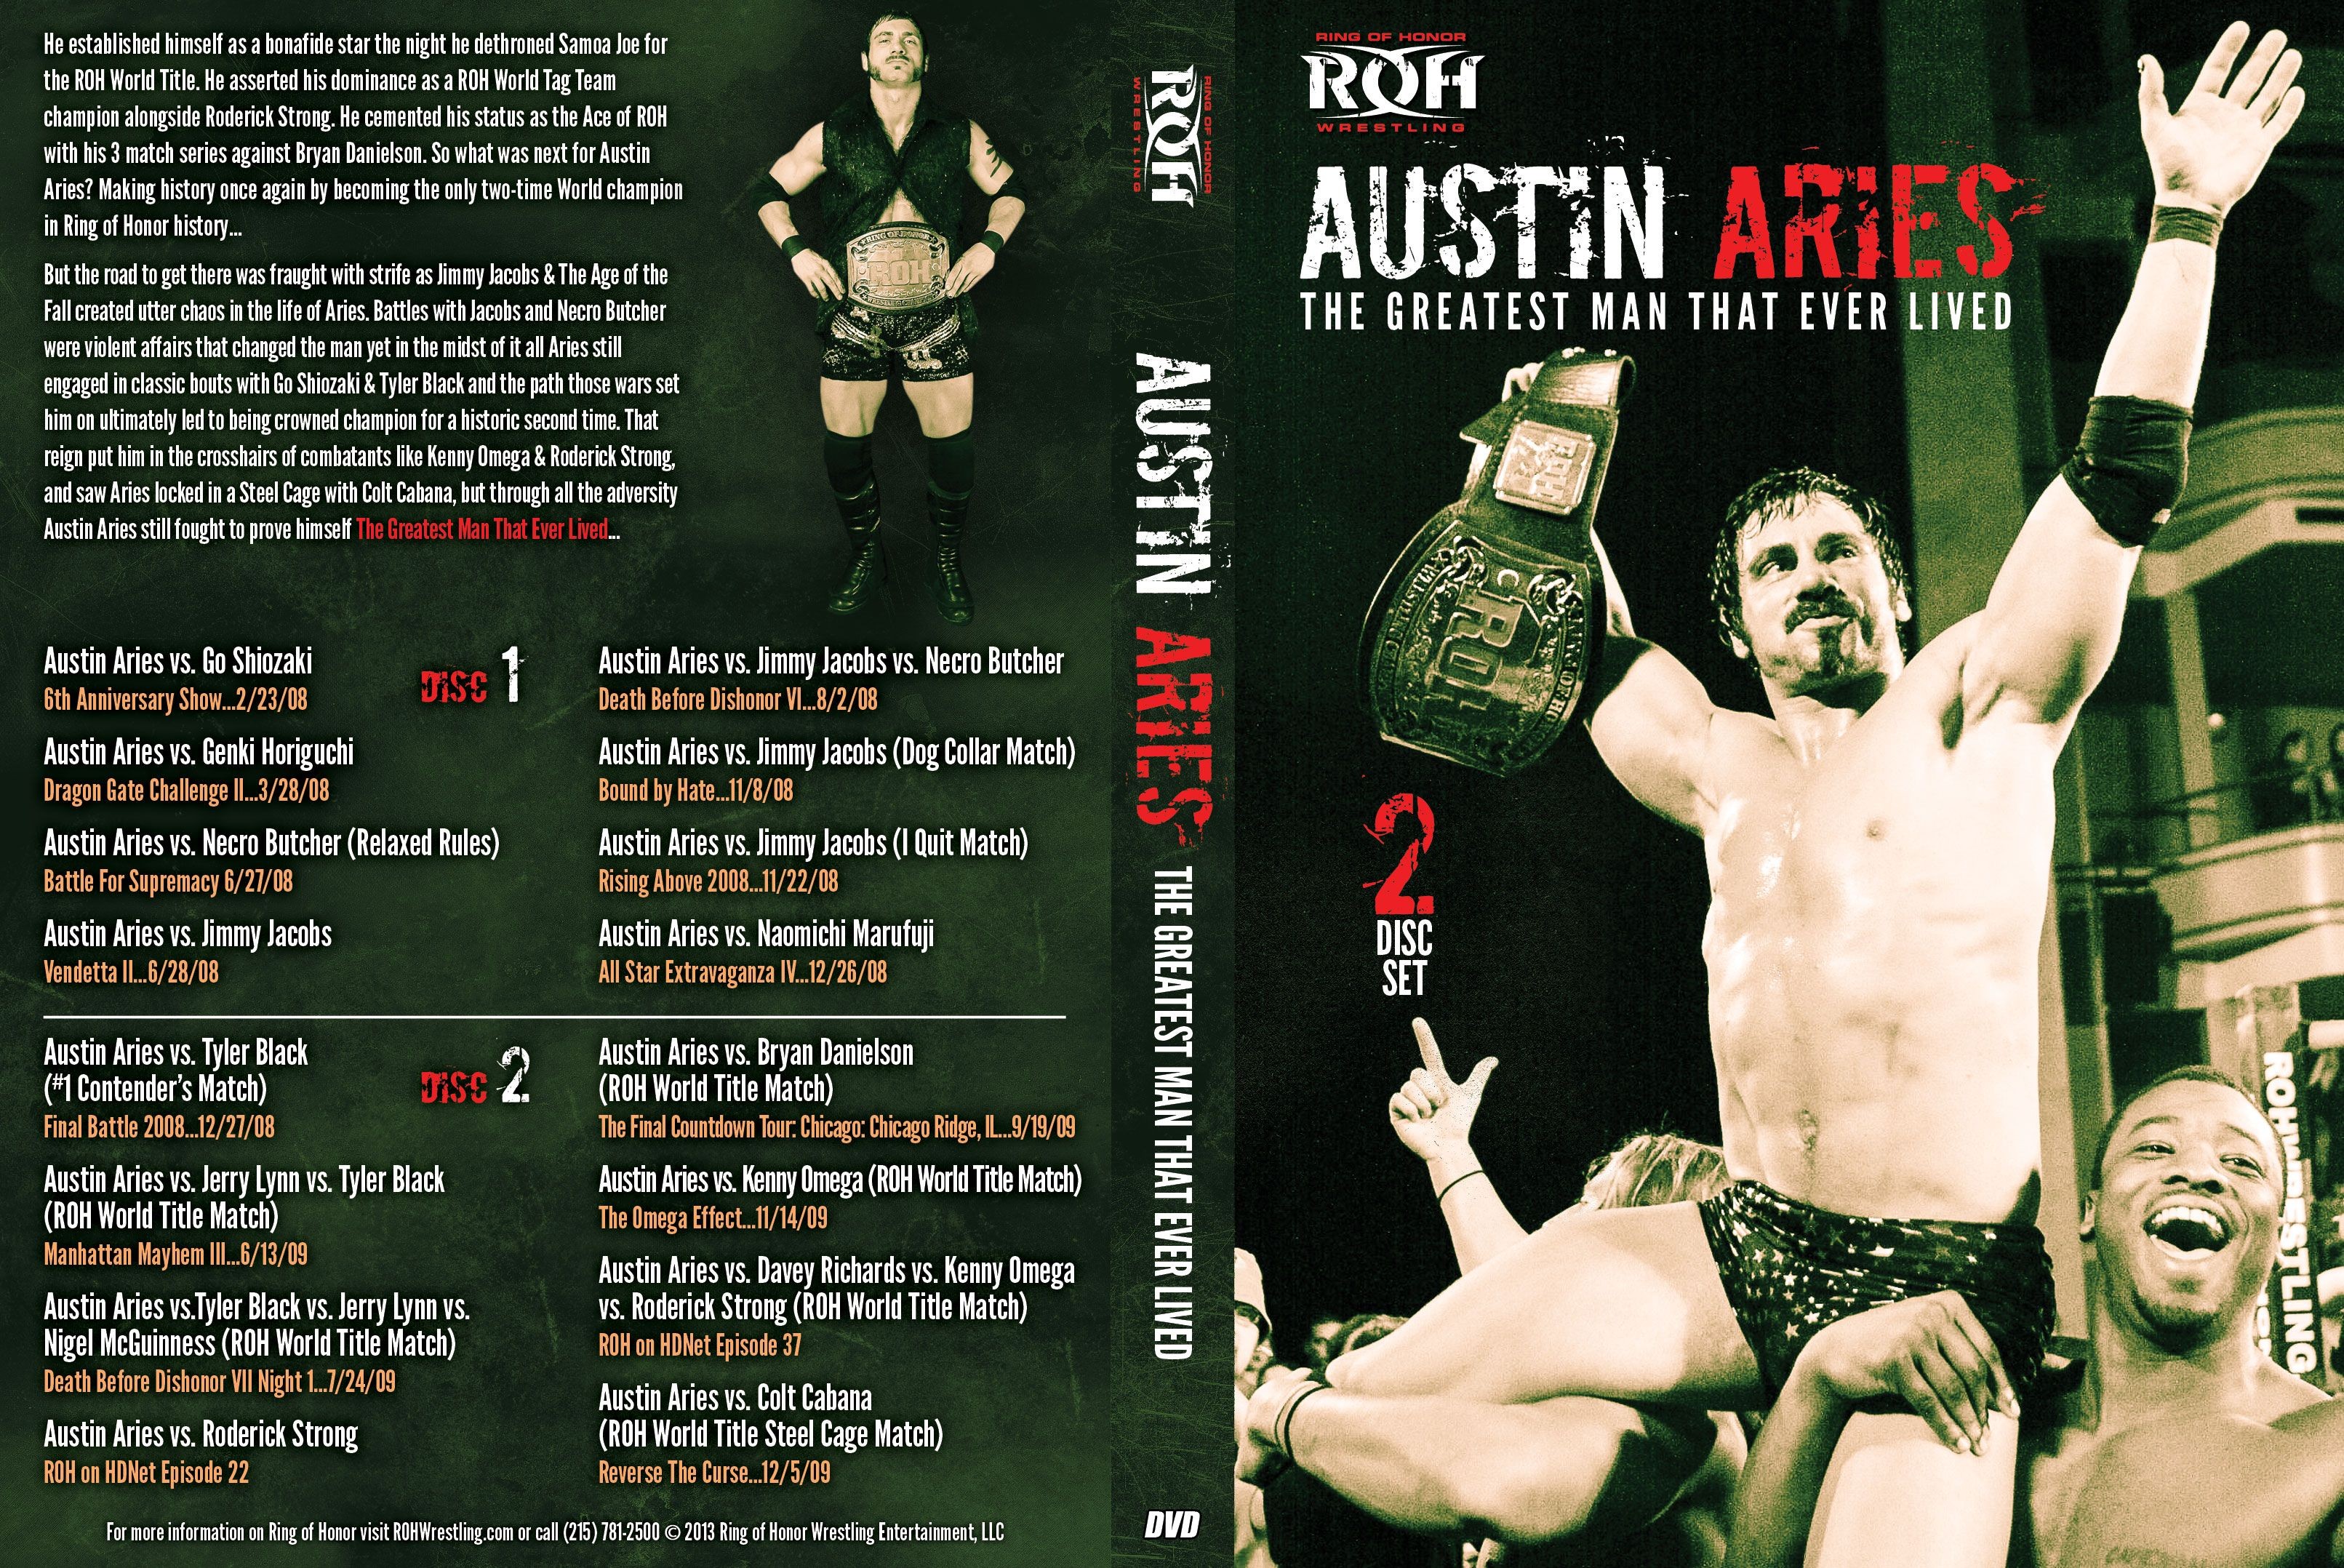 Austin Aries “The Greatest Man That Ever Lived” Cover